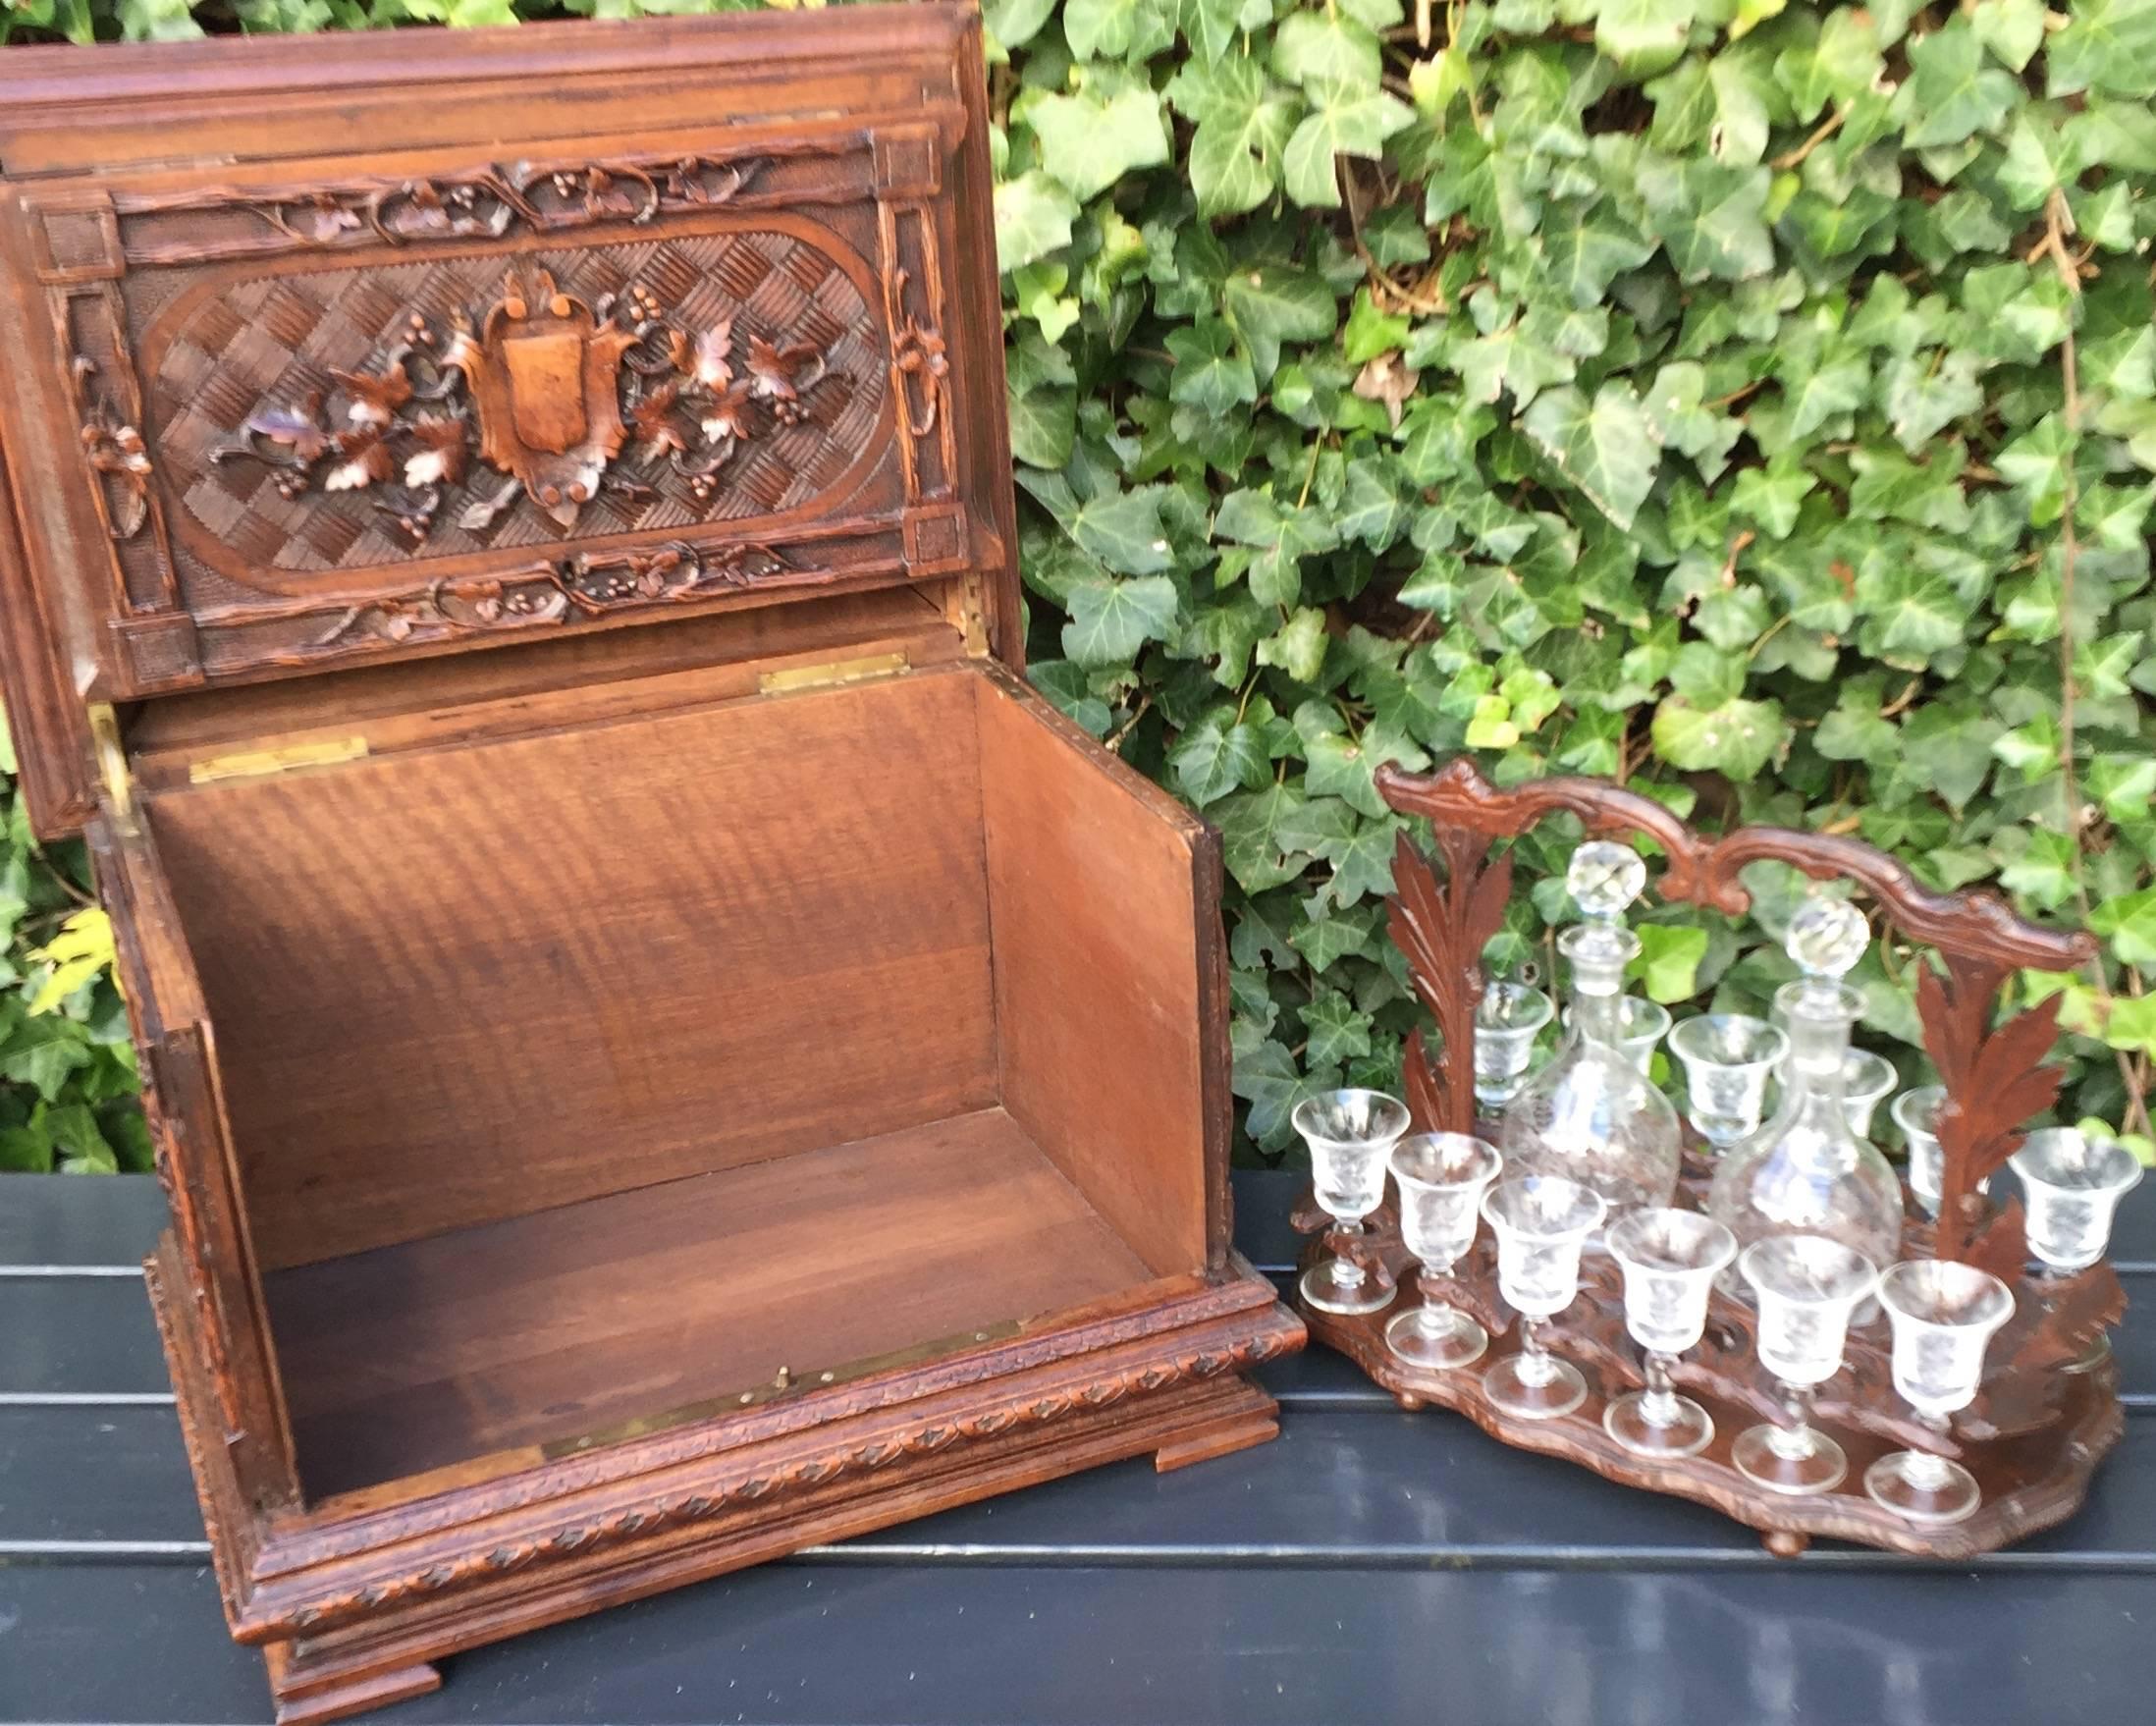 Huge and museum quality hand-carved walnut wood Black Forest art Victorian era liquor tantalus.

This magnificent Black Forest drinks box, dates from circa 1860. The beautiful glasses and decanters are of a later date, bute they go really well with